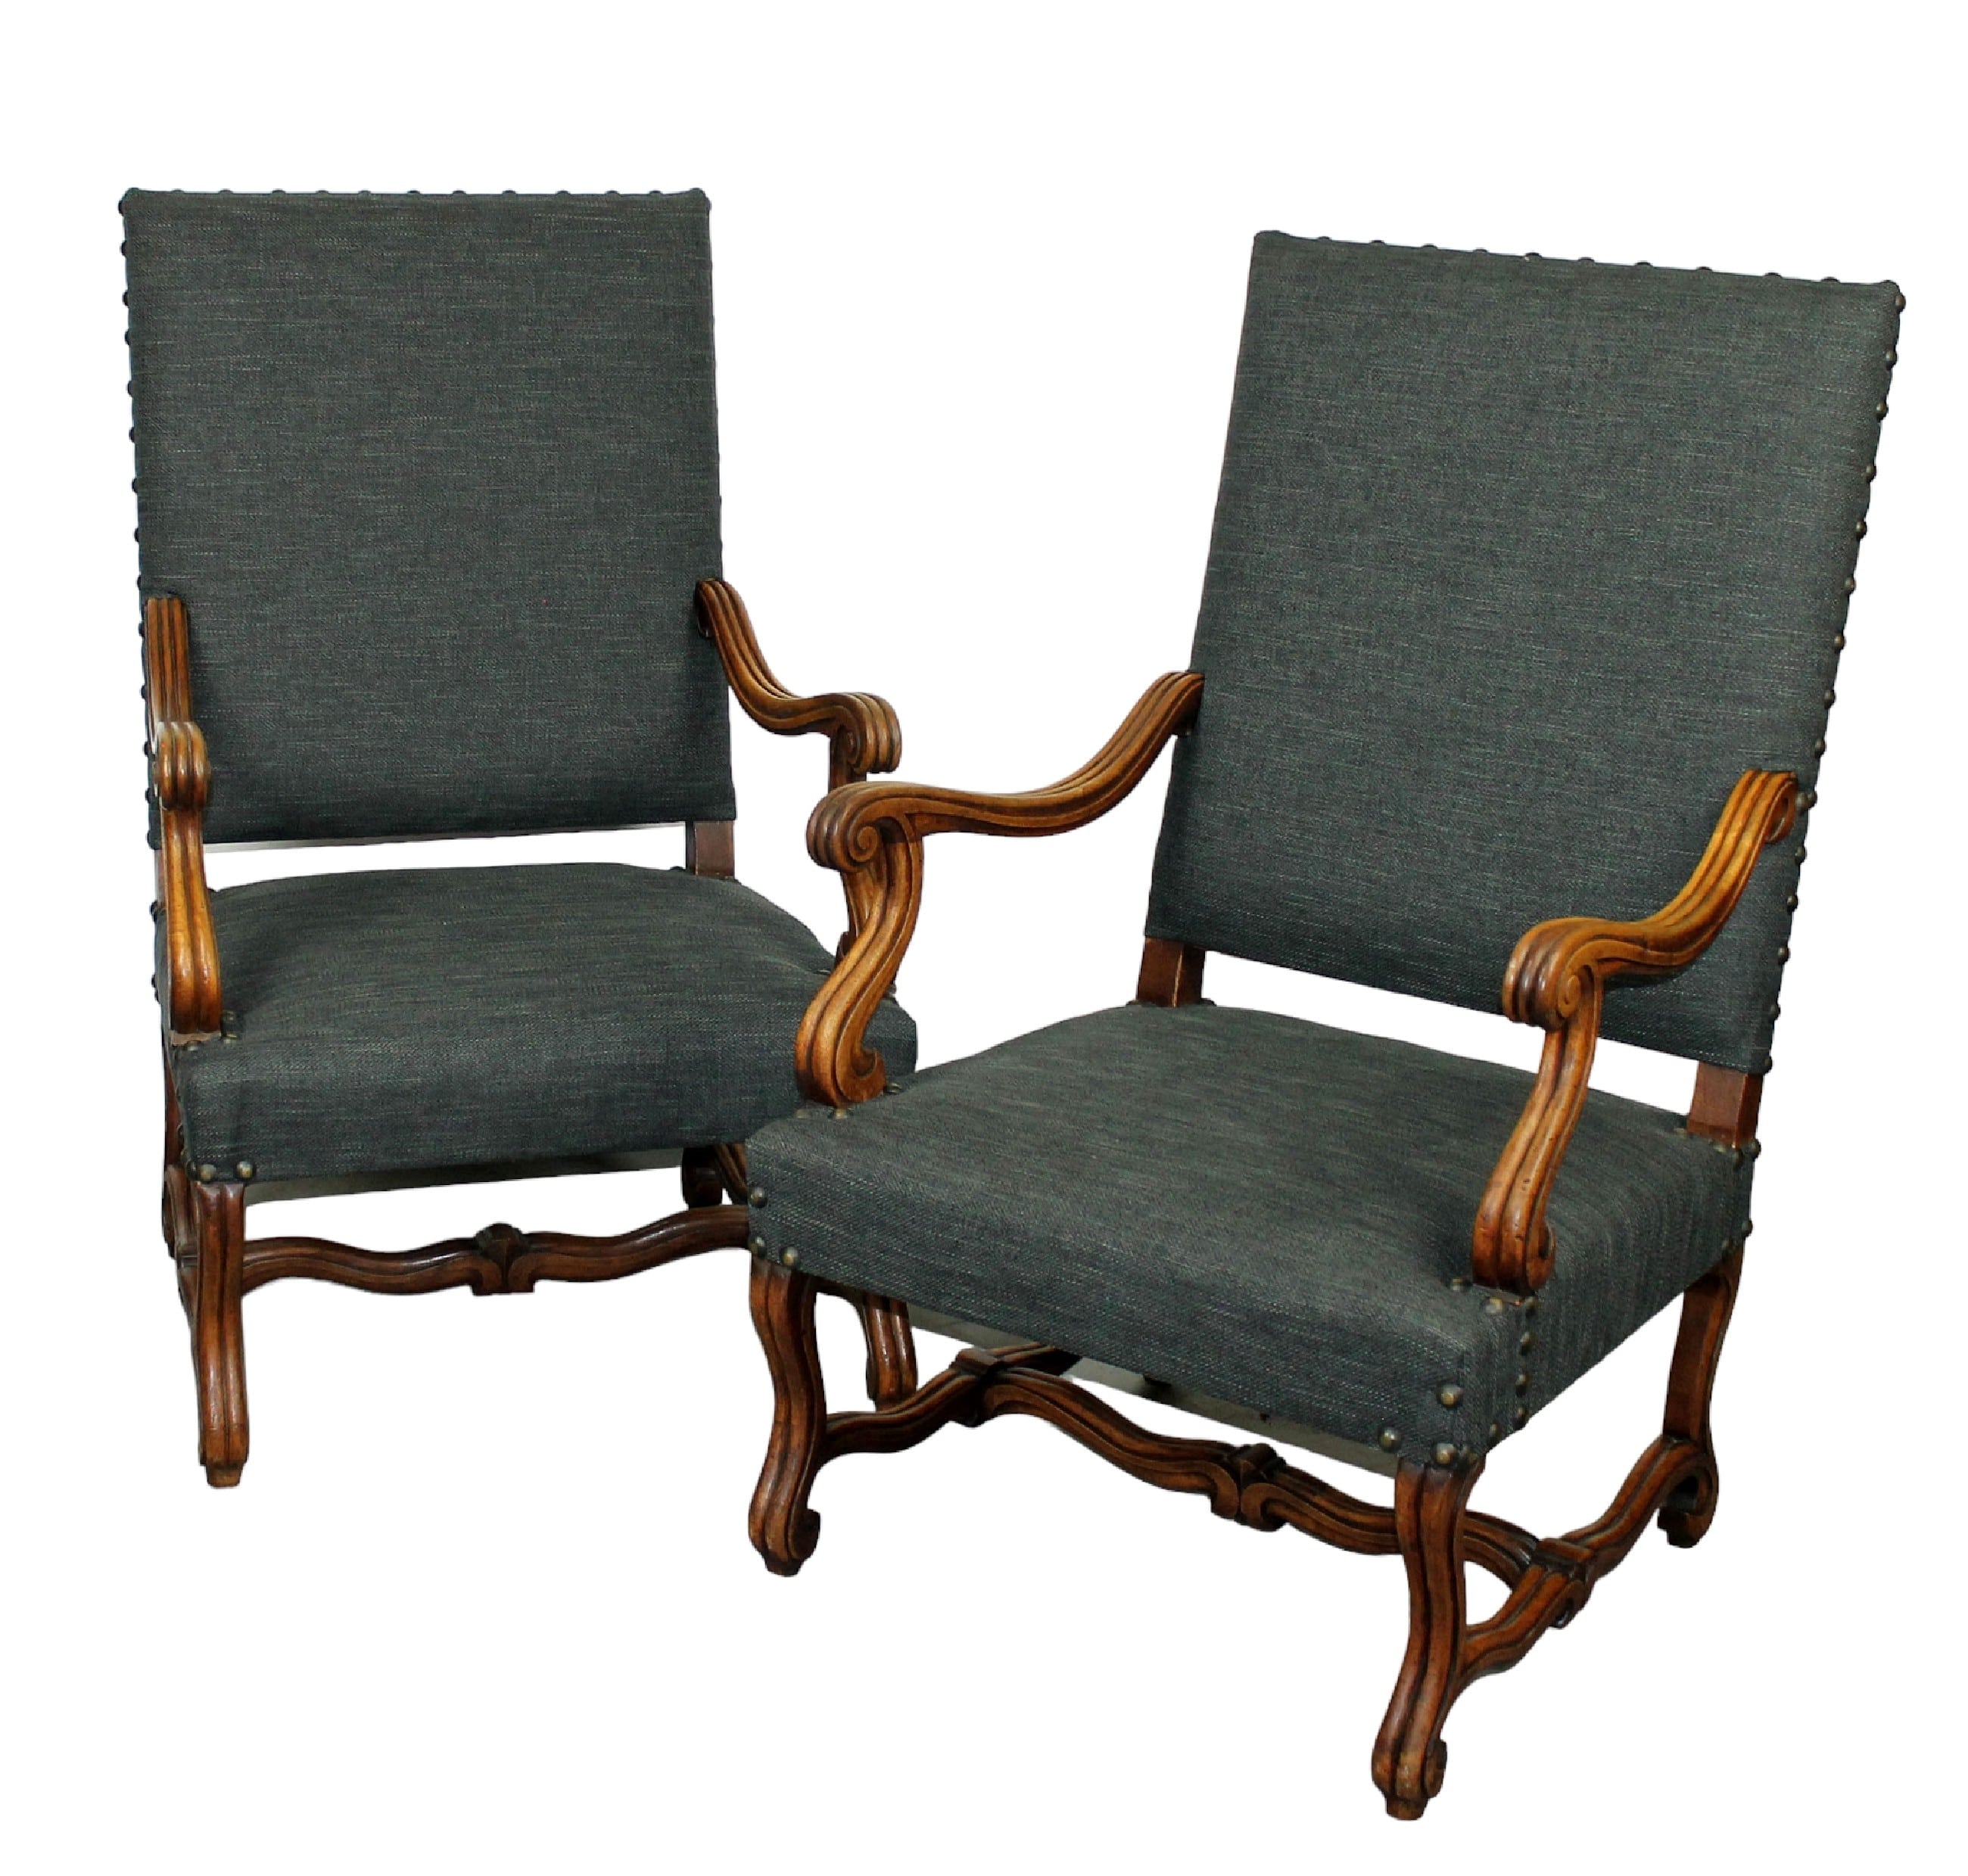 Pair of French Louis XIII style os du mouton chairs